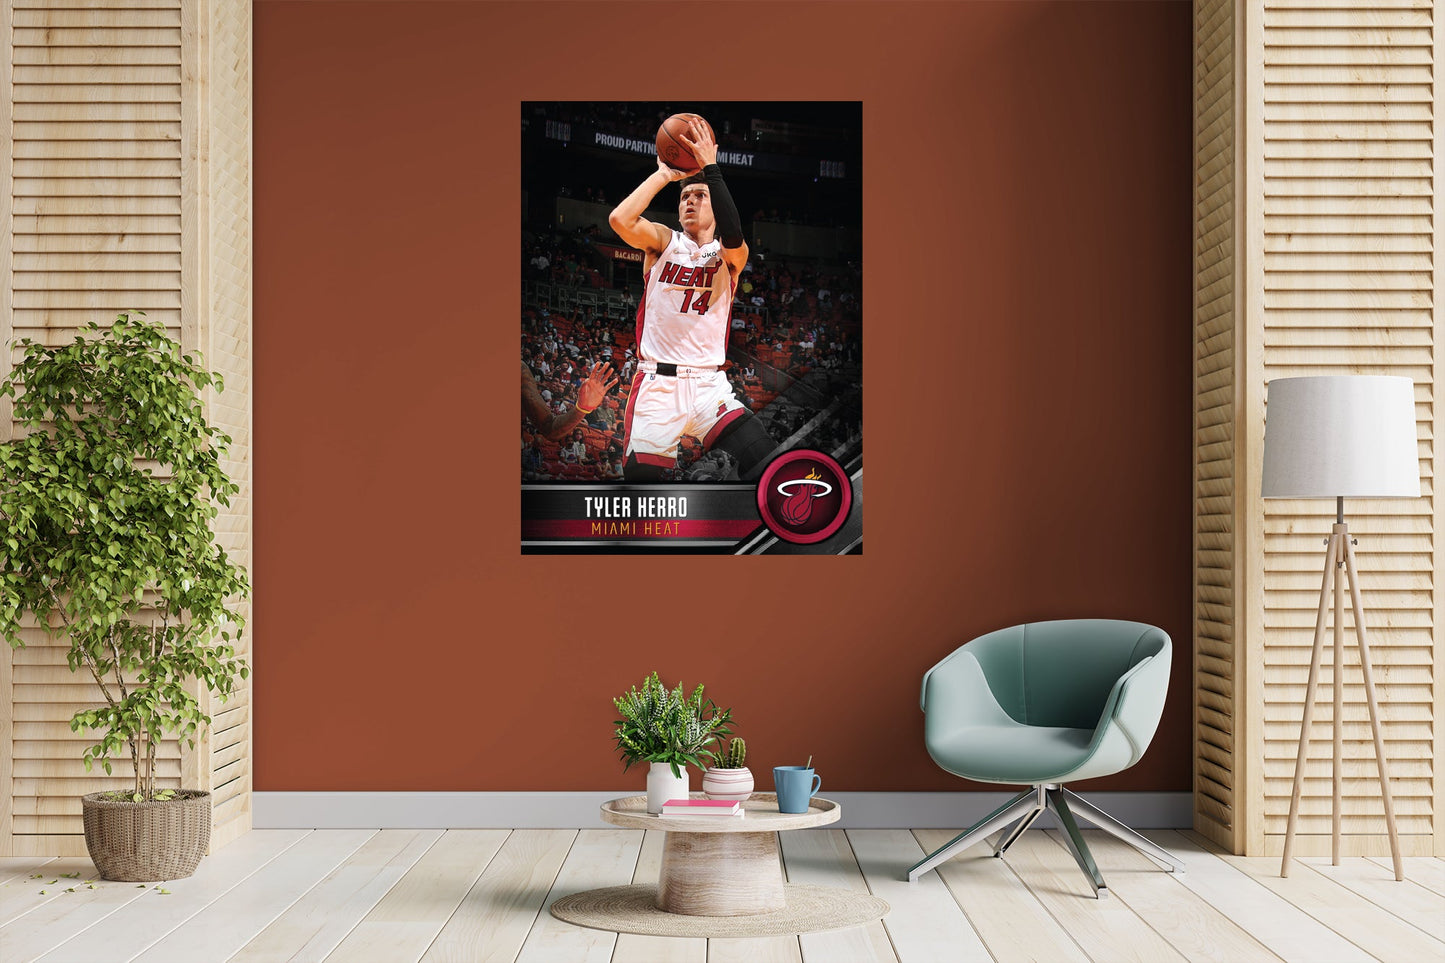 Miami Heat: Tyler Herro Poster - Officially Licensed NBA Removable Adhesive Decal